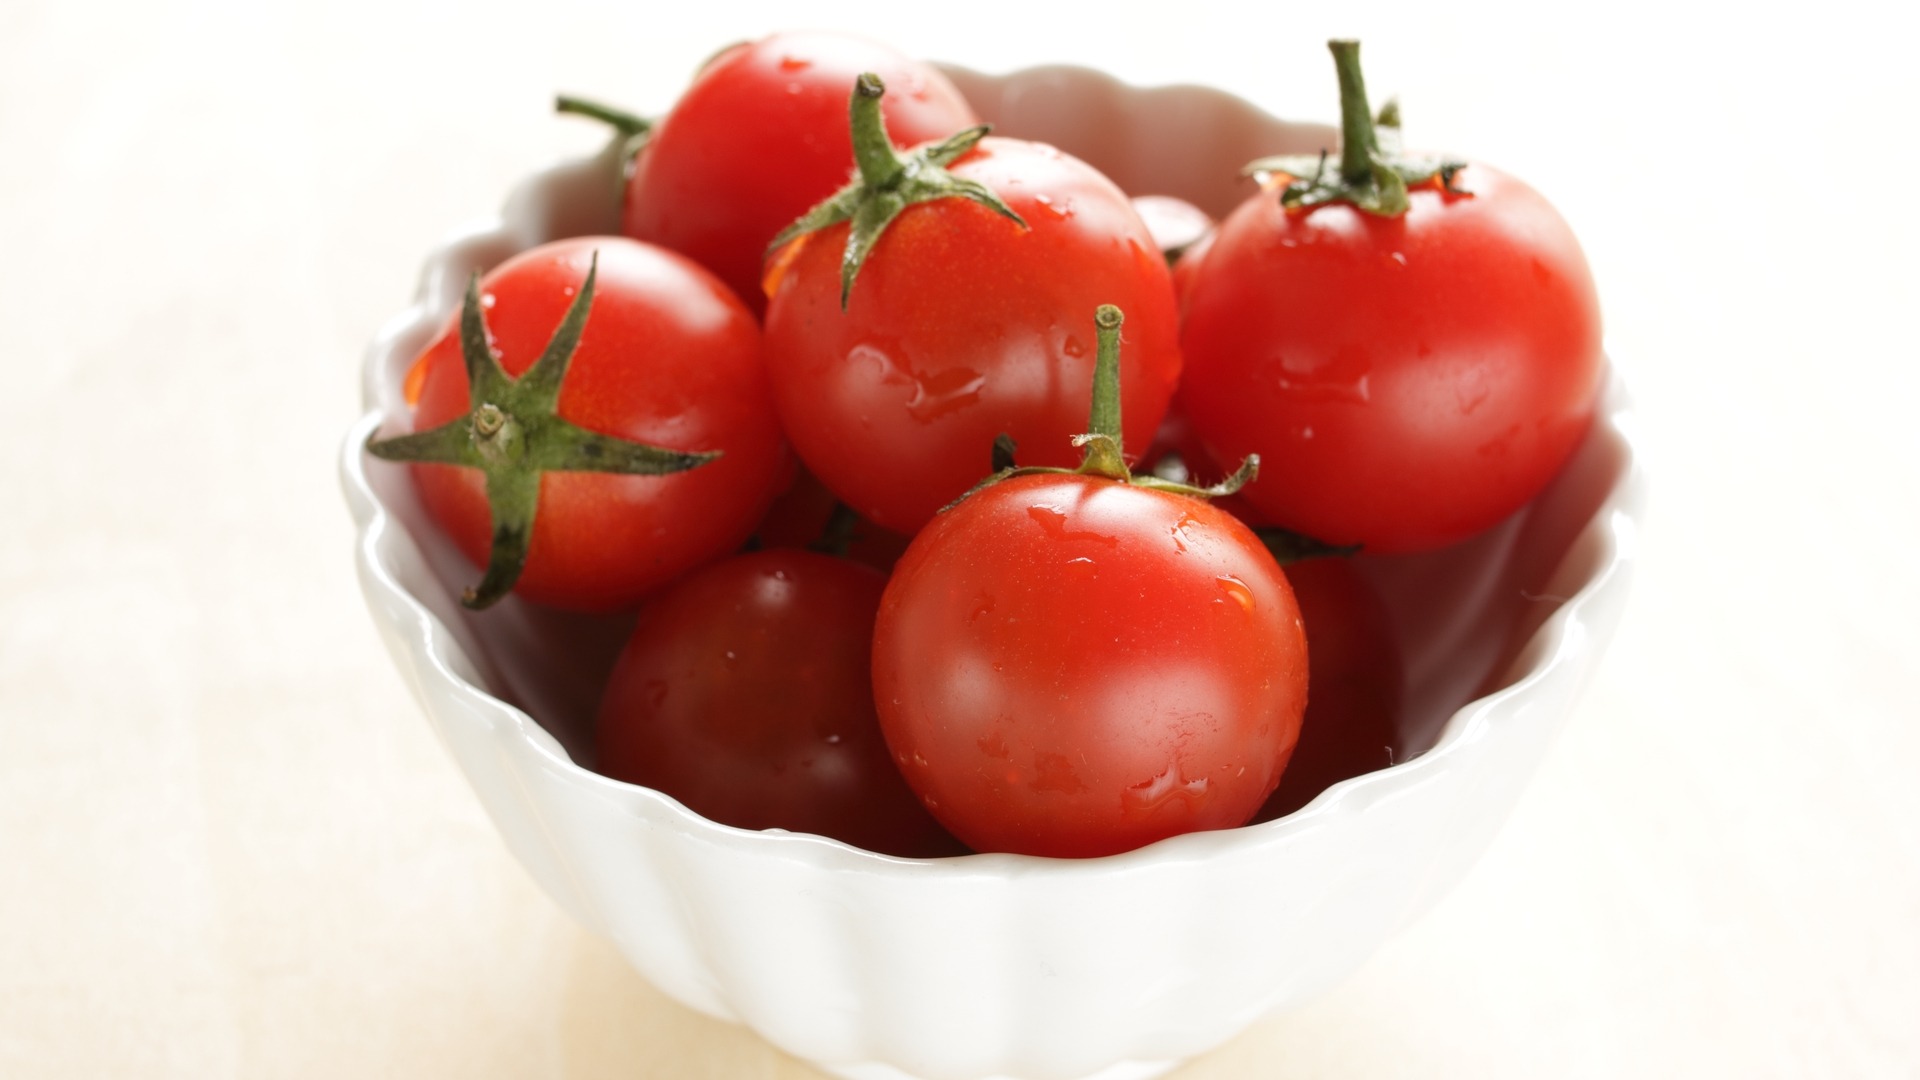 The Kumato Tomato Mystery: Why It's Hard to Grow and Are They Worth the Hype?